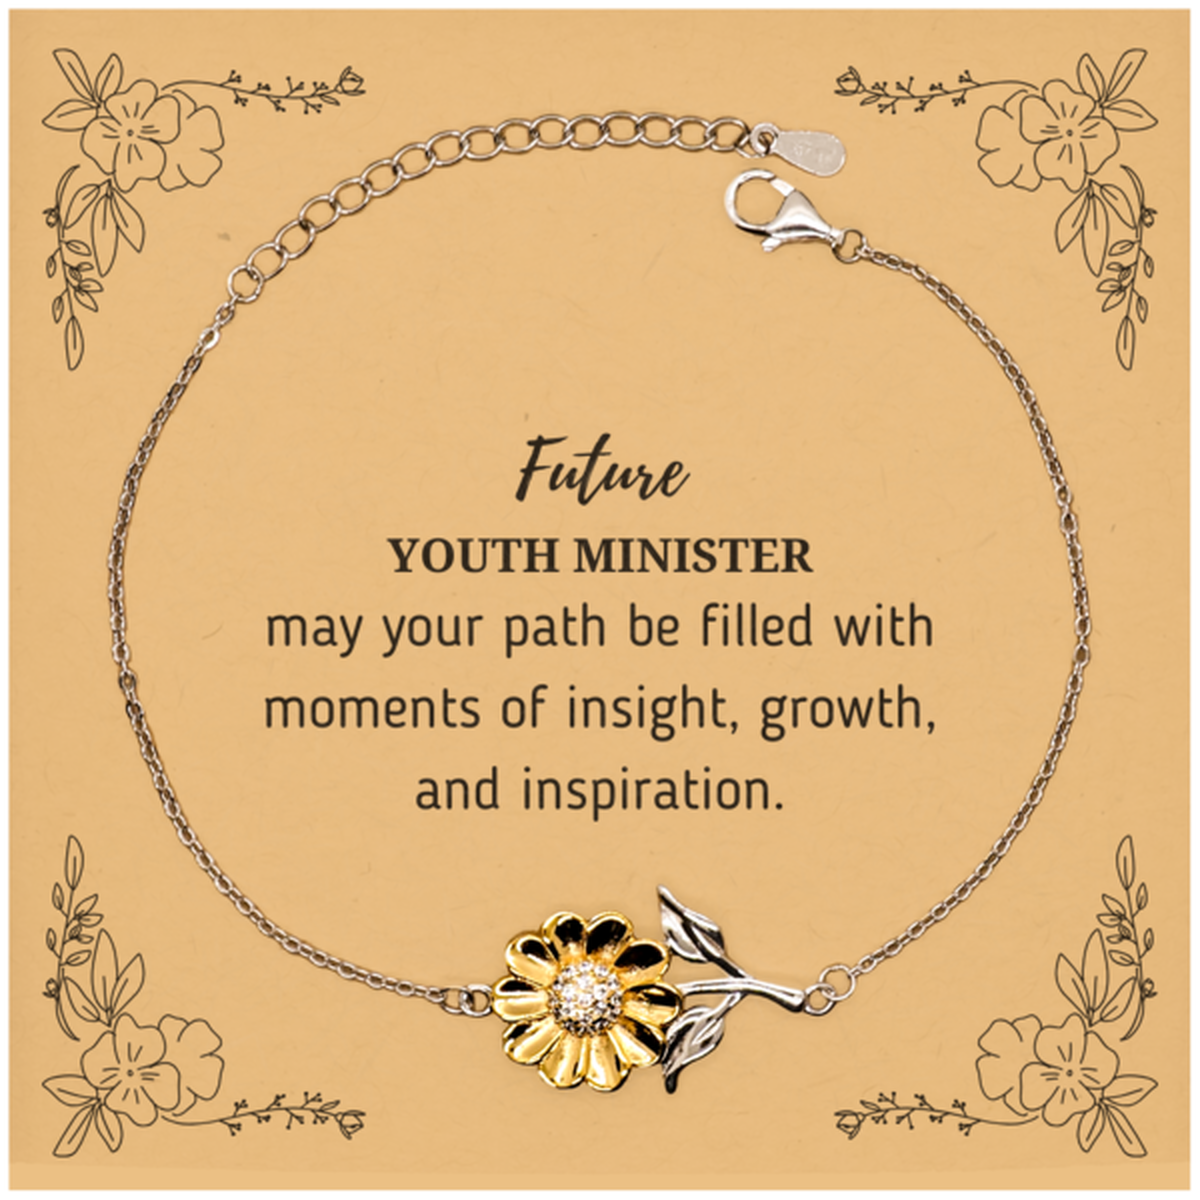 Future Youth Minister Gifts, May your path be filled with moments of insight, Graduation Gifts for New Youth Minister, Christmas Unique Sunflower Bracelet For Men, Women, Friends